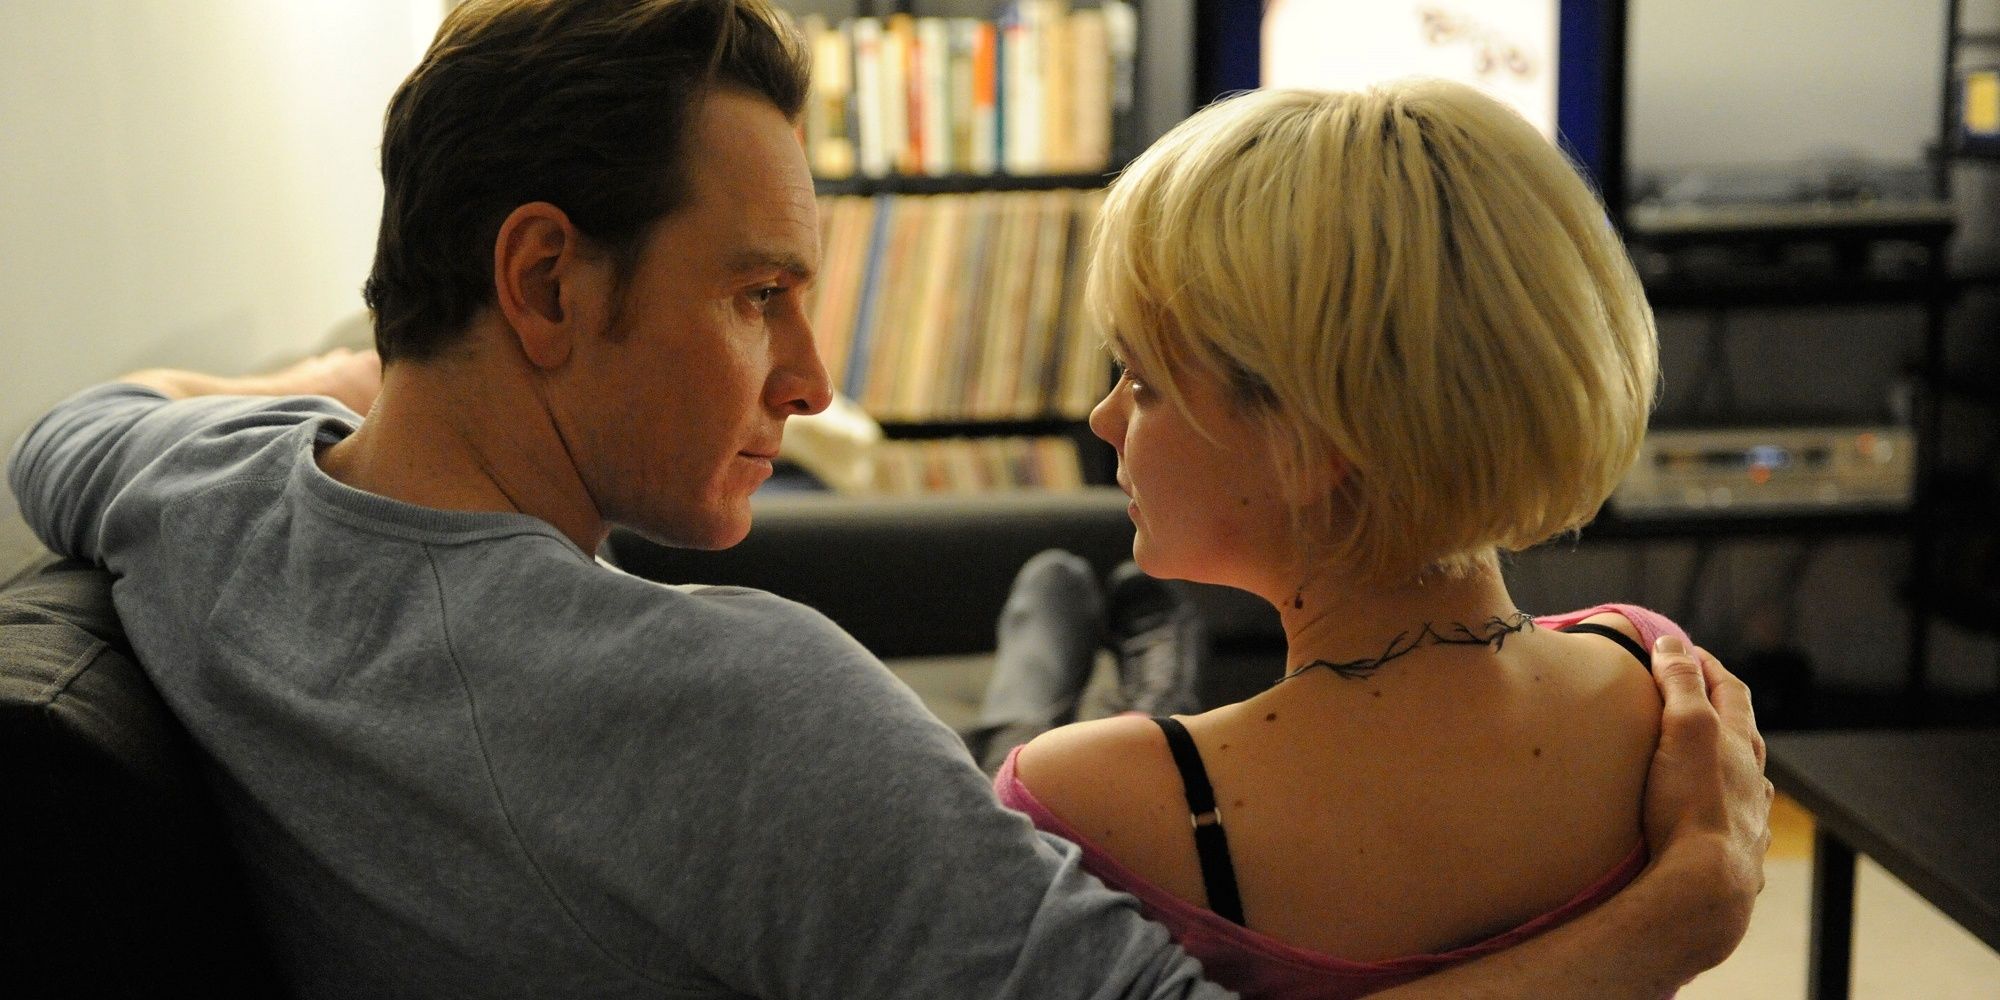 Michael Fassbender and Carey Mulligan sitting together on a couch in 'Shame.'